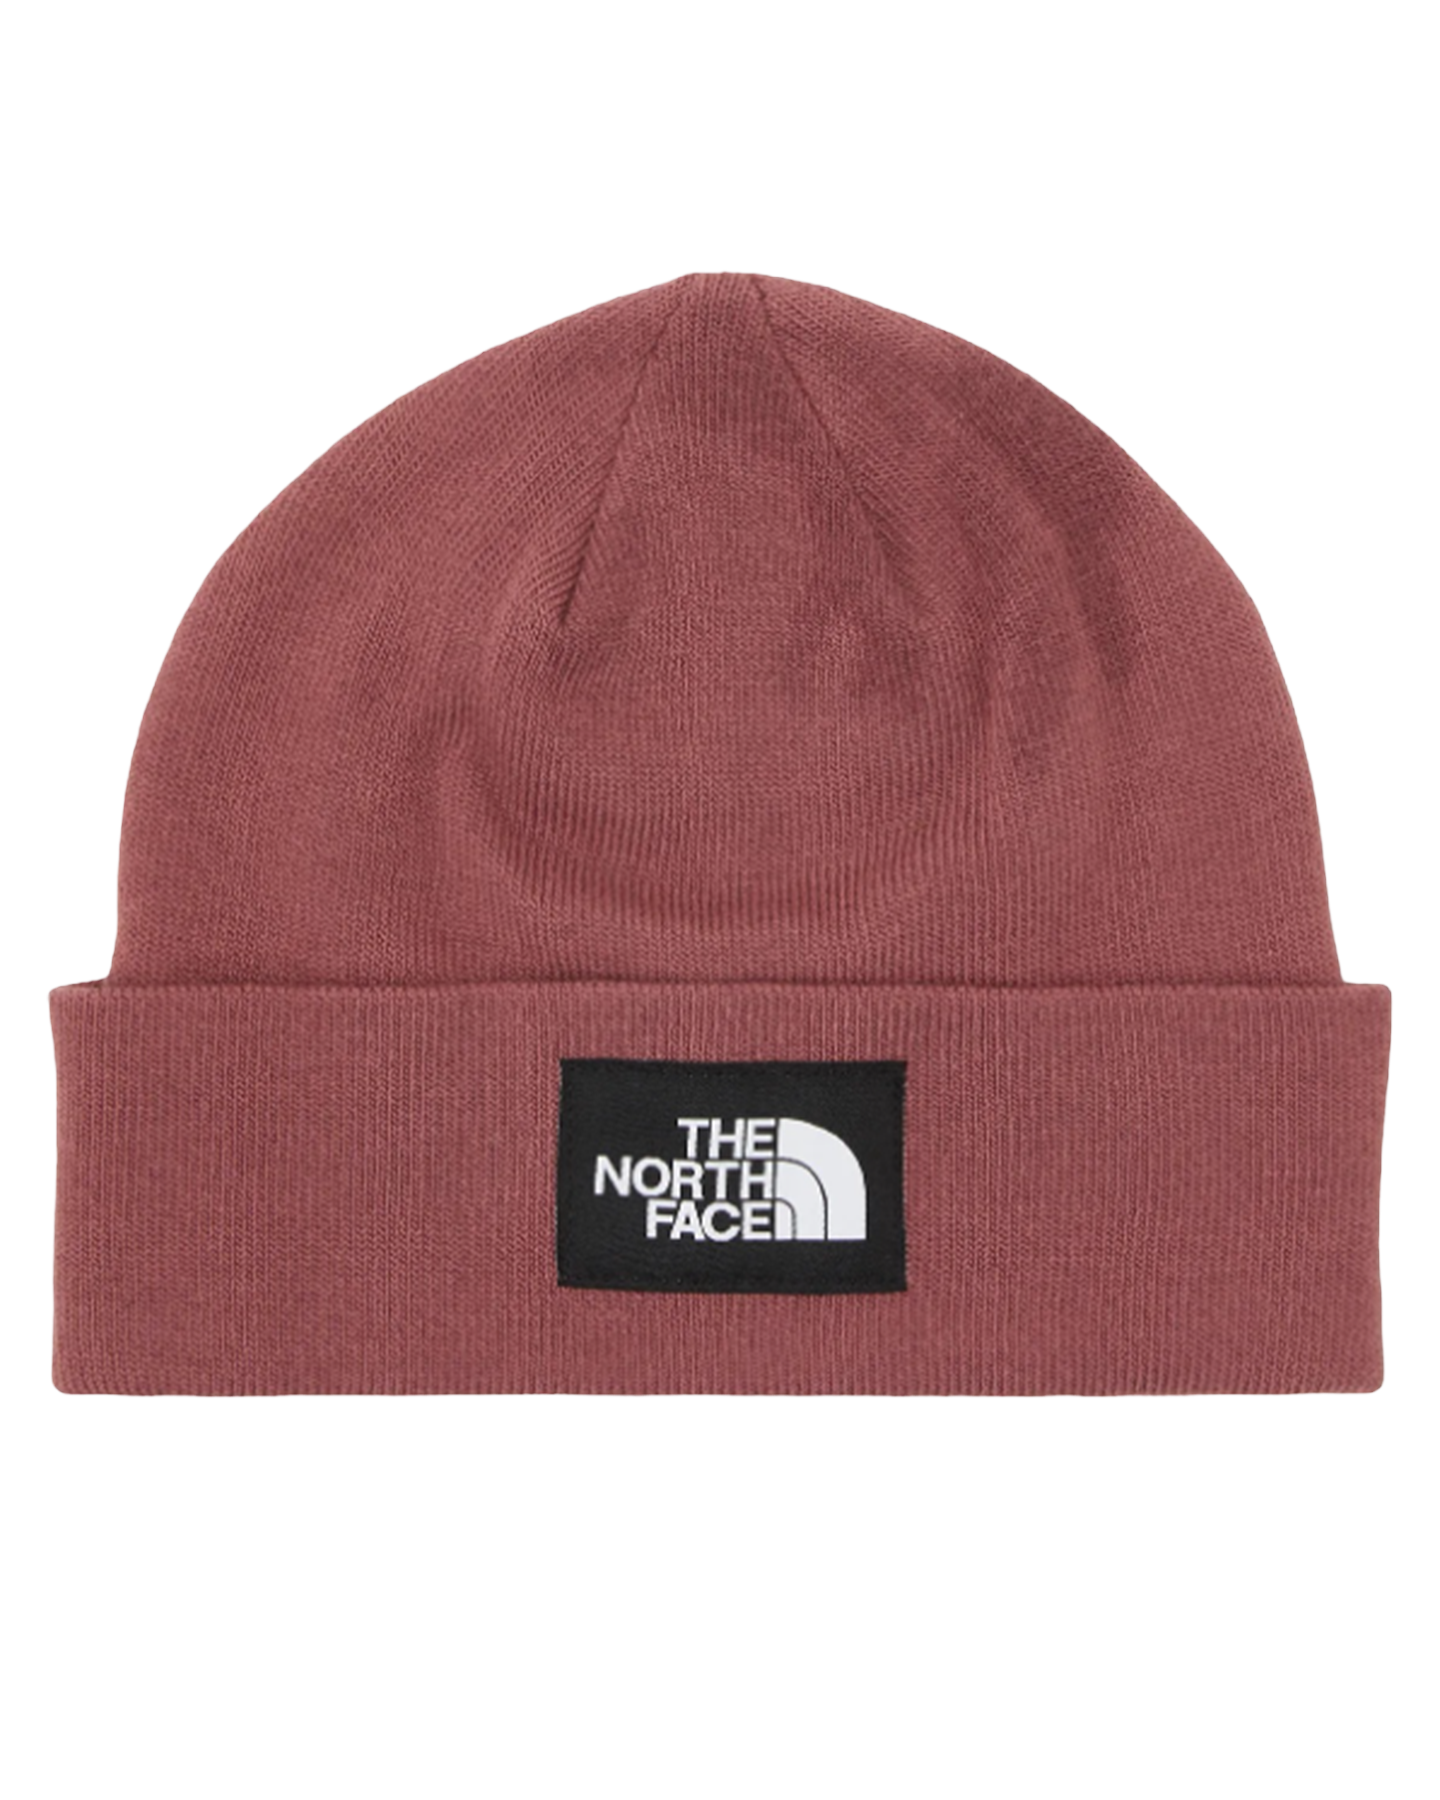 The North Face Dock Worker Recycled Beanie - Wild Ginger Beanies - SnowSkiersWarehouse